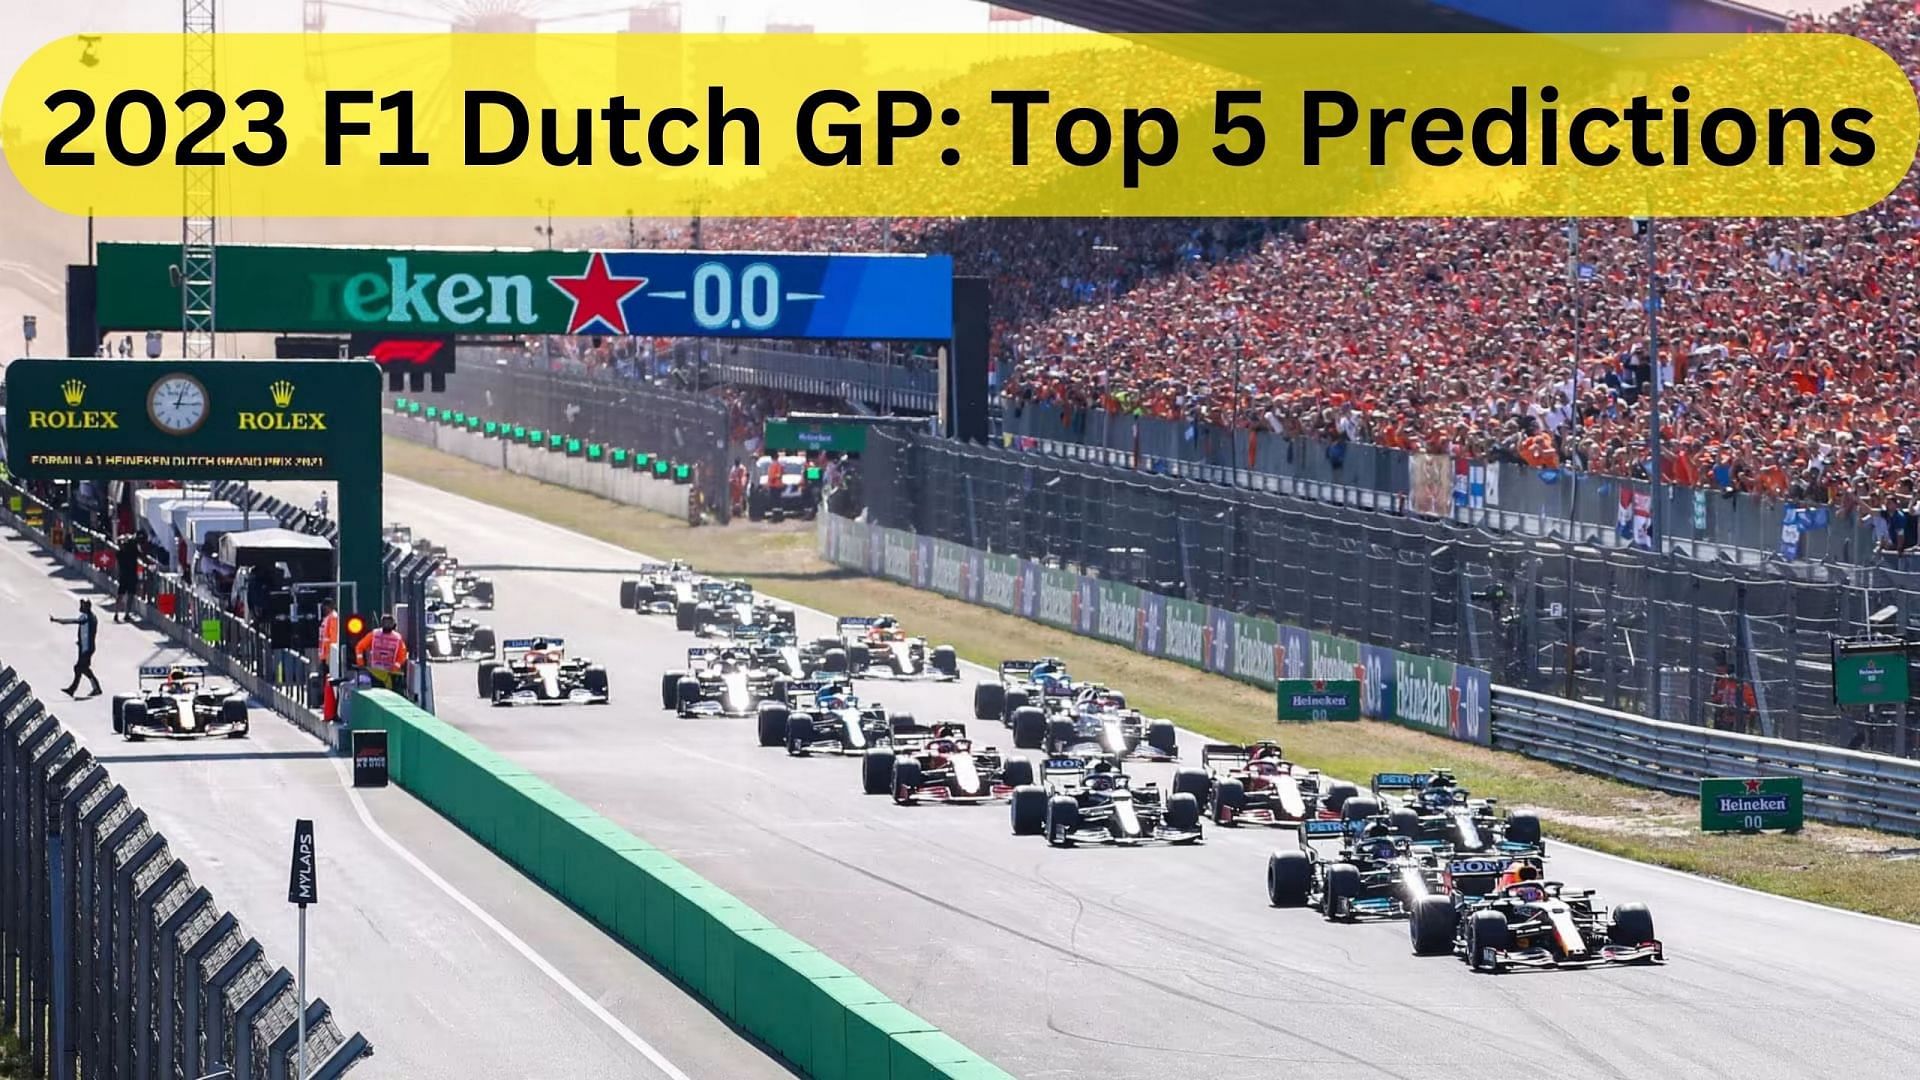 Top 5 predictions for the Dutch GP